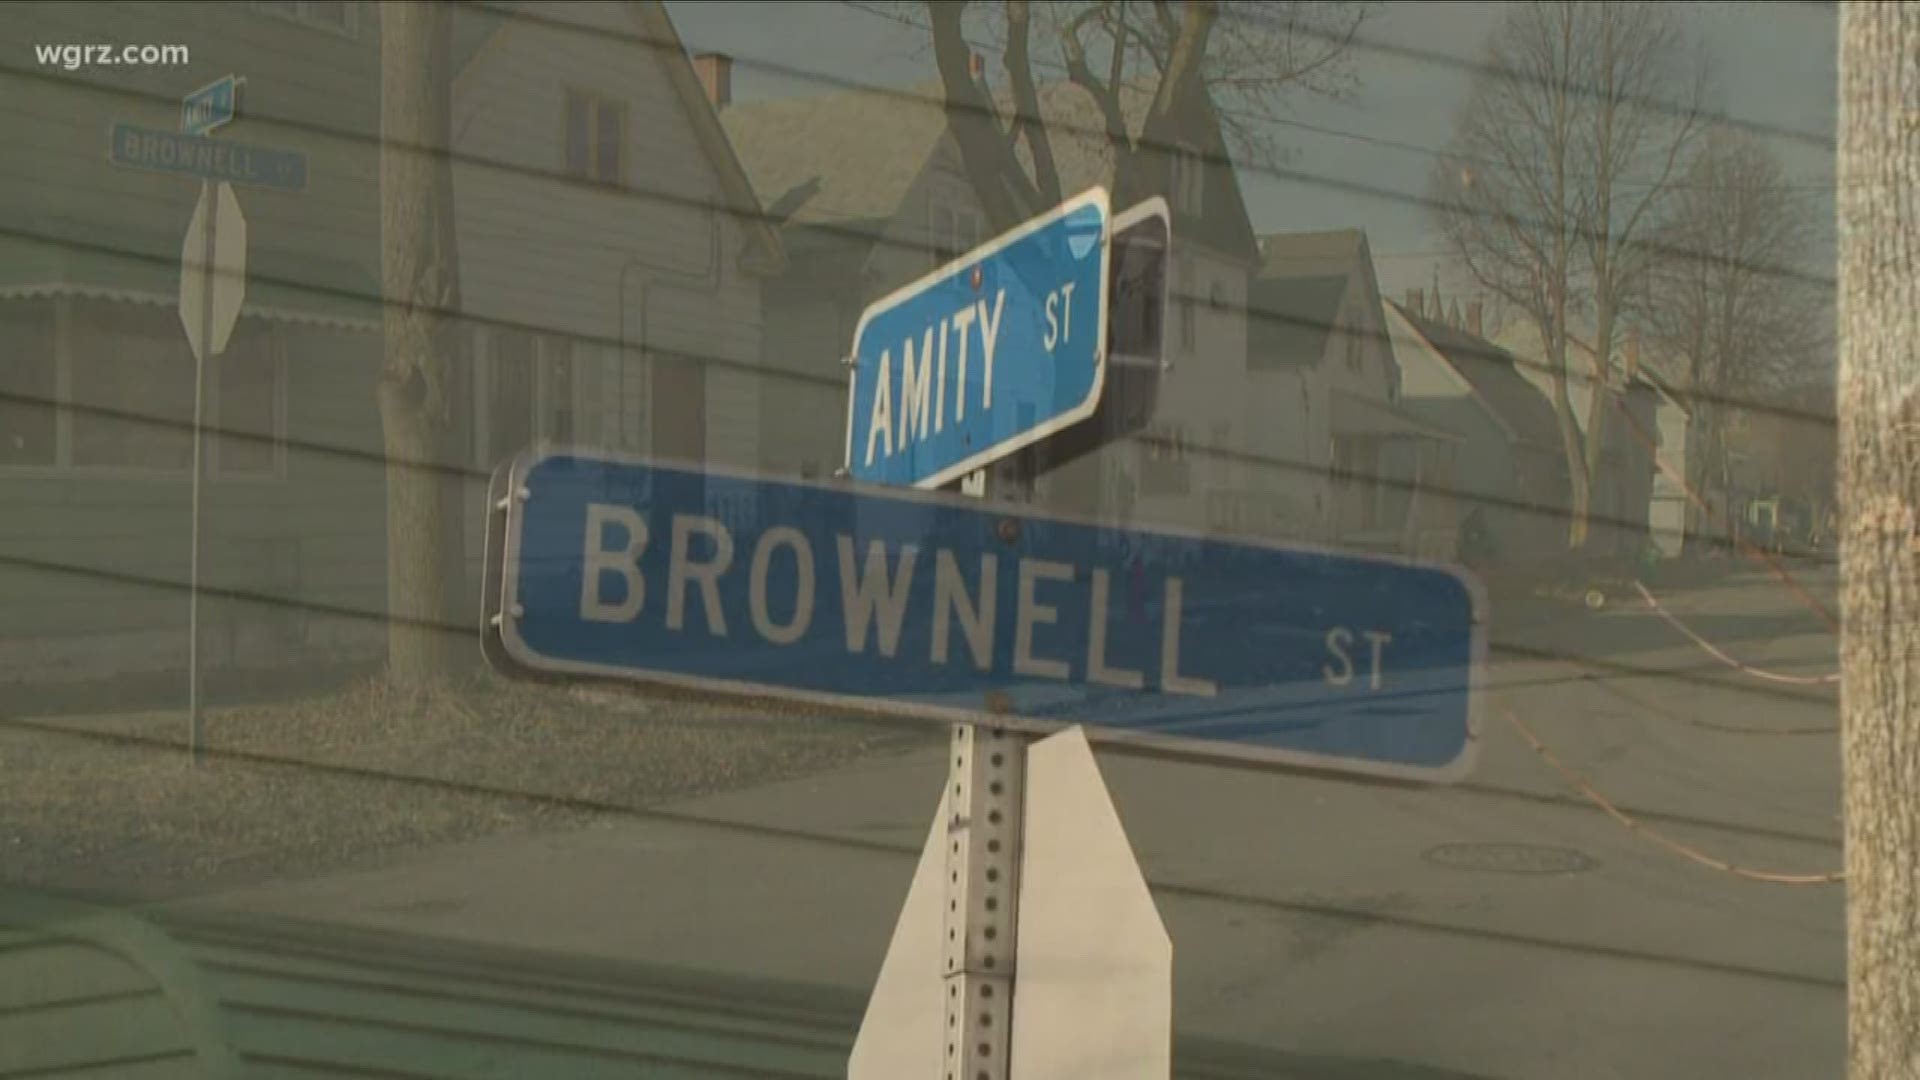 Buffalo police have given "2 On Your Side" an update on a 30-year-old man who was shot on Christmas morning on Brownell Street.